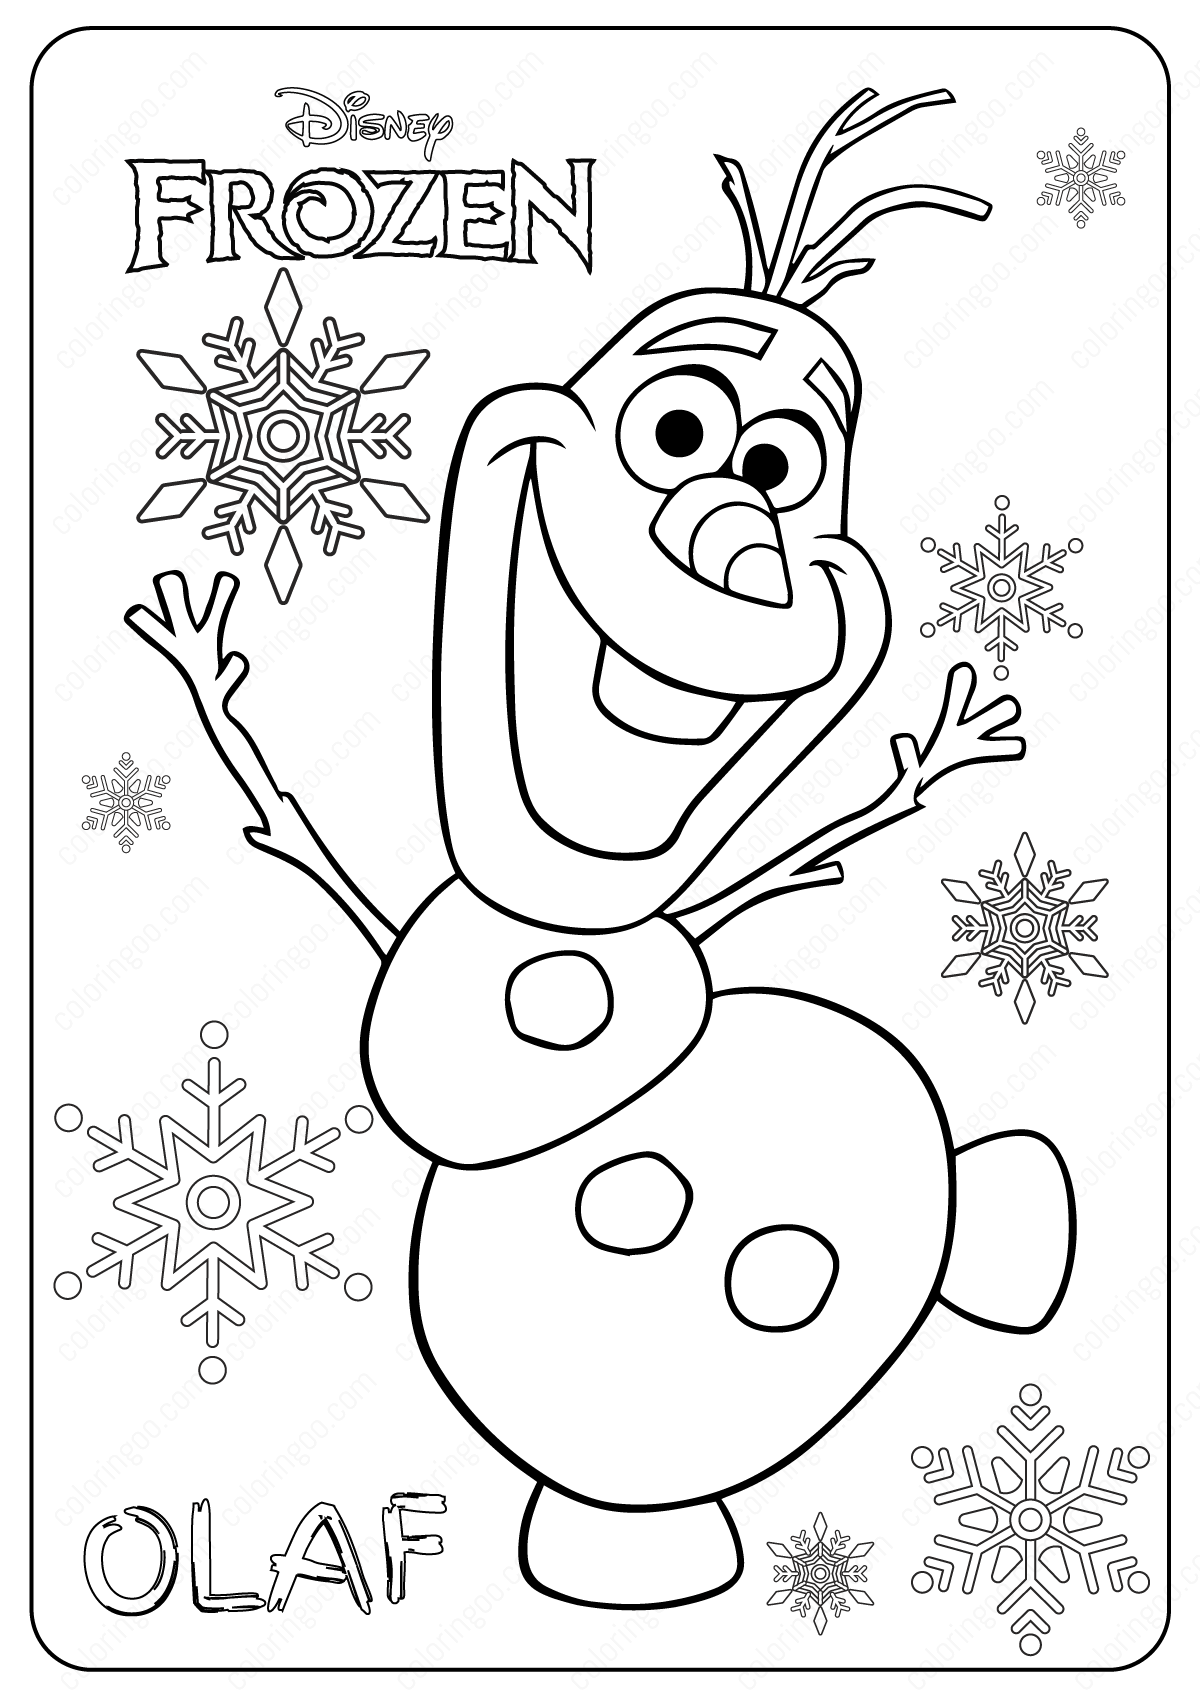 Free printable frozen olaf coloring pages top quality free printable coloring drâ frozen coloring pages disney coloring pages printables disney coloring pages